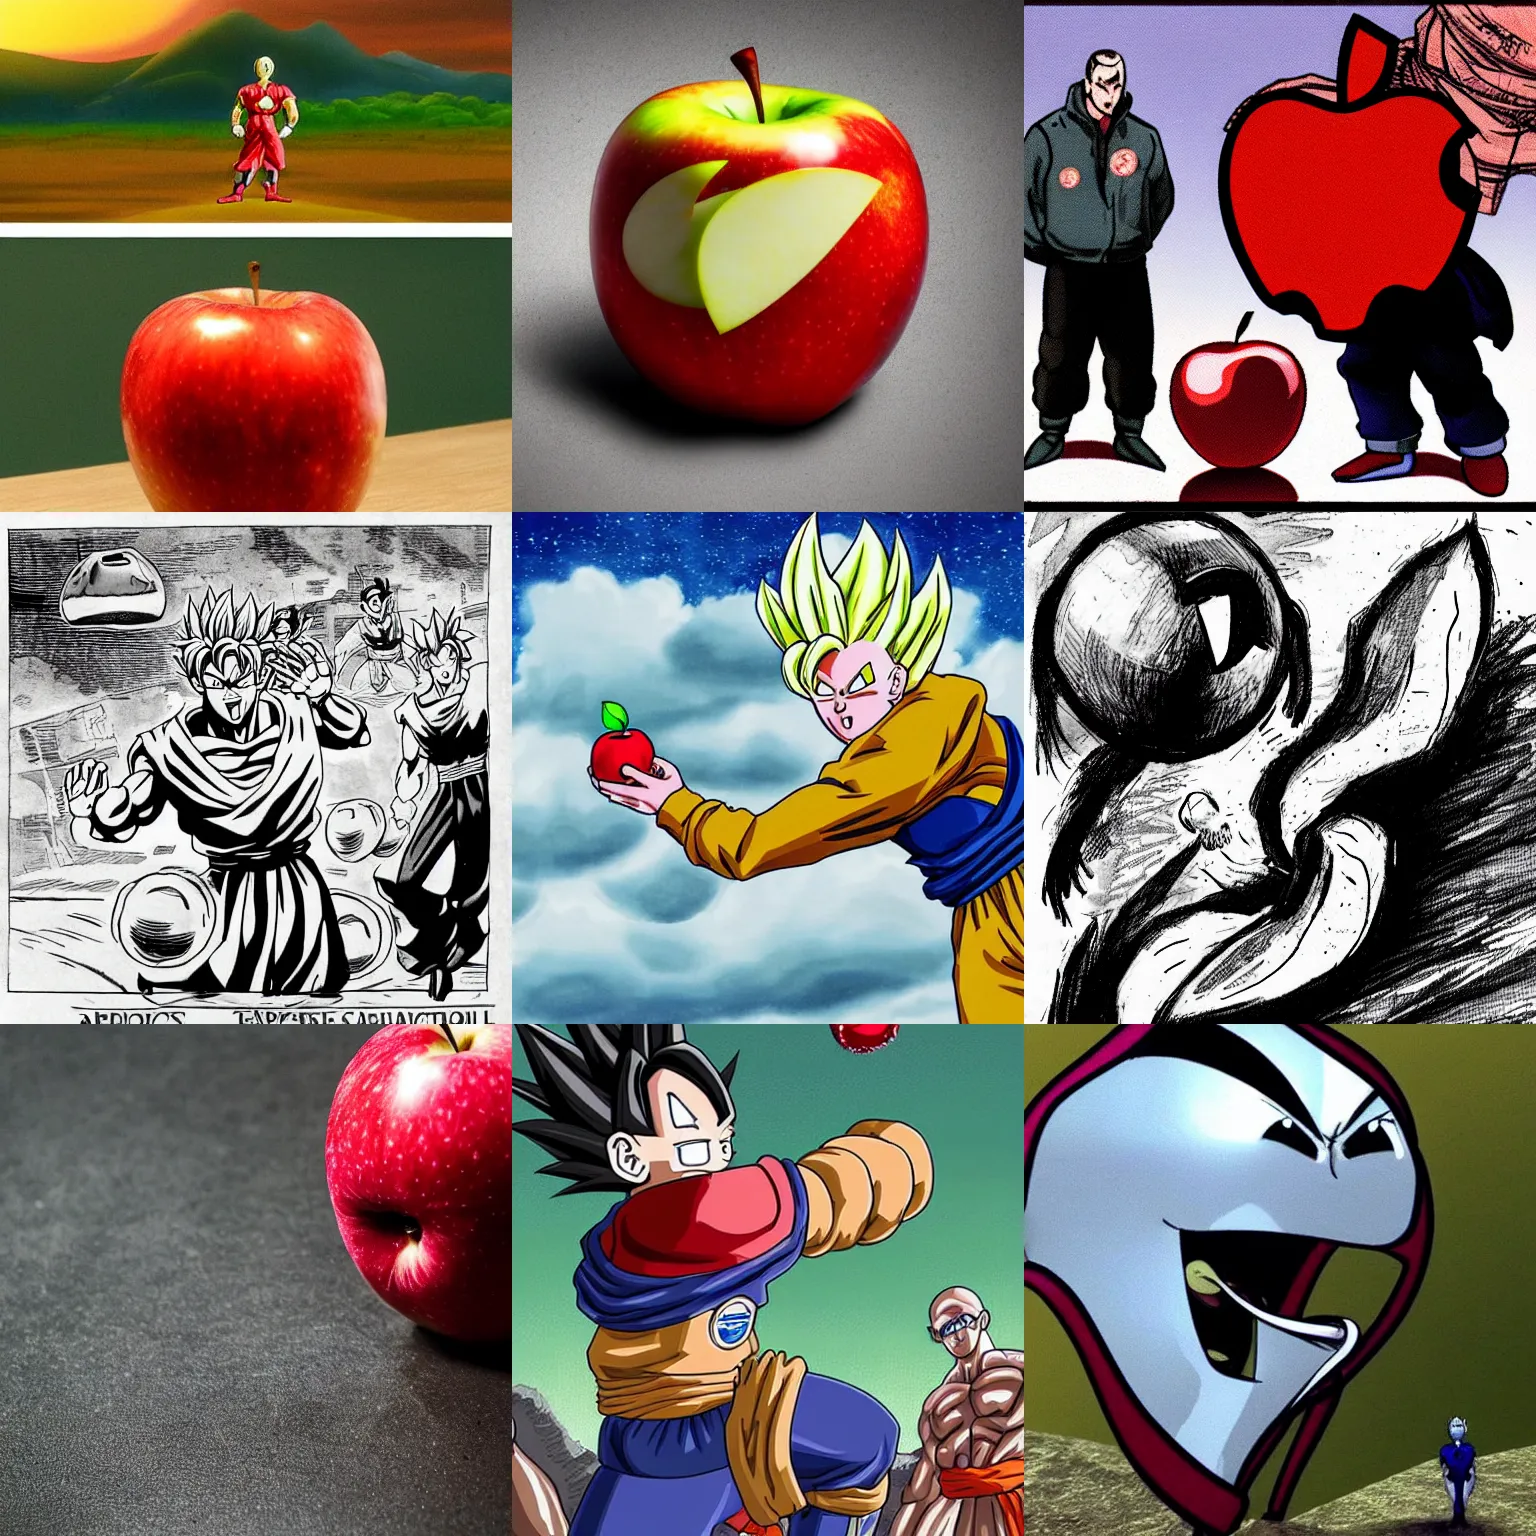 Prompt: a man deploys an apple to stop the advance of several doctors. doctors scream at an apple that repels them physically. apple forcefield pushes back medical professionals. dragon ball z art, energy battle. this is the apple that each day keeps the hordes of doctors away.